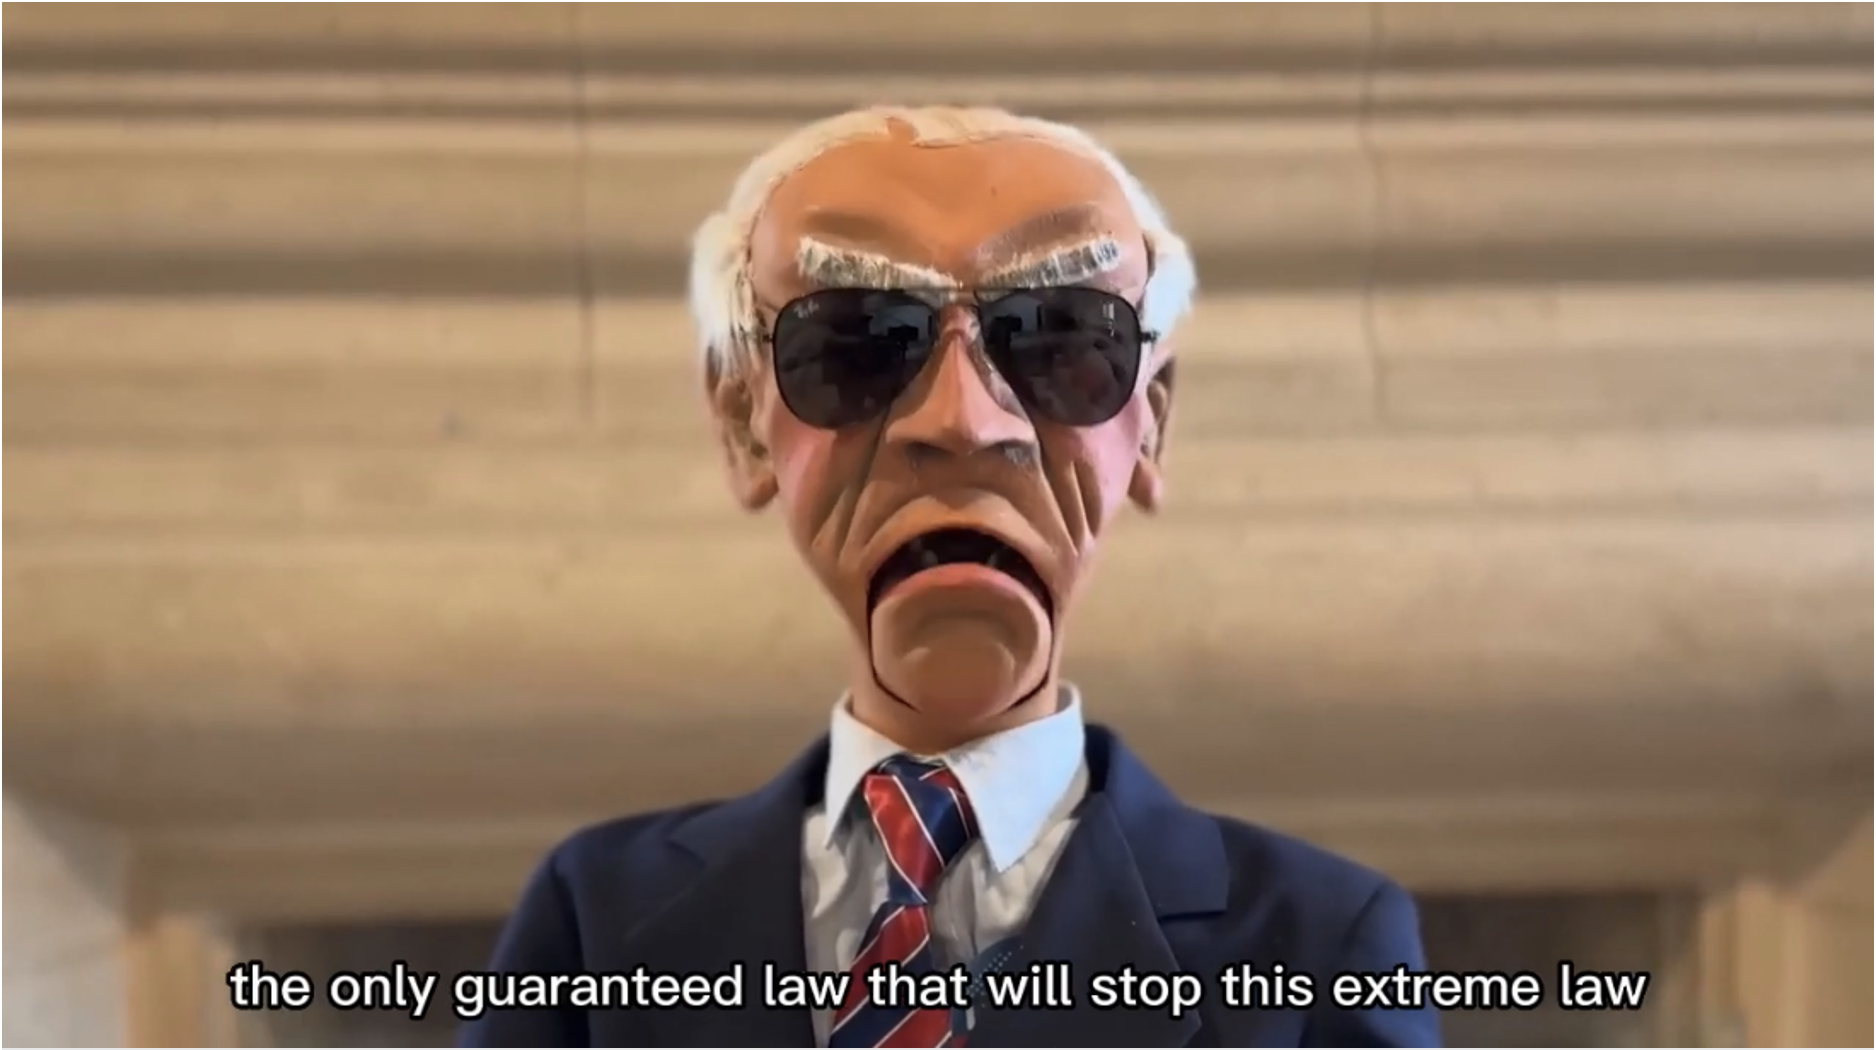 DRAGONBRIDGE video featuring a short animation caricaturing and depicting U.S. President Biden urging Americans concerned with abortion rights to vote in the midterms